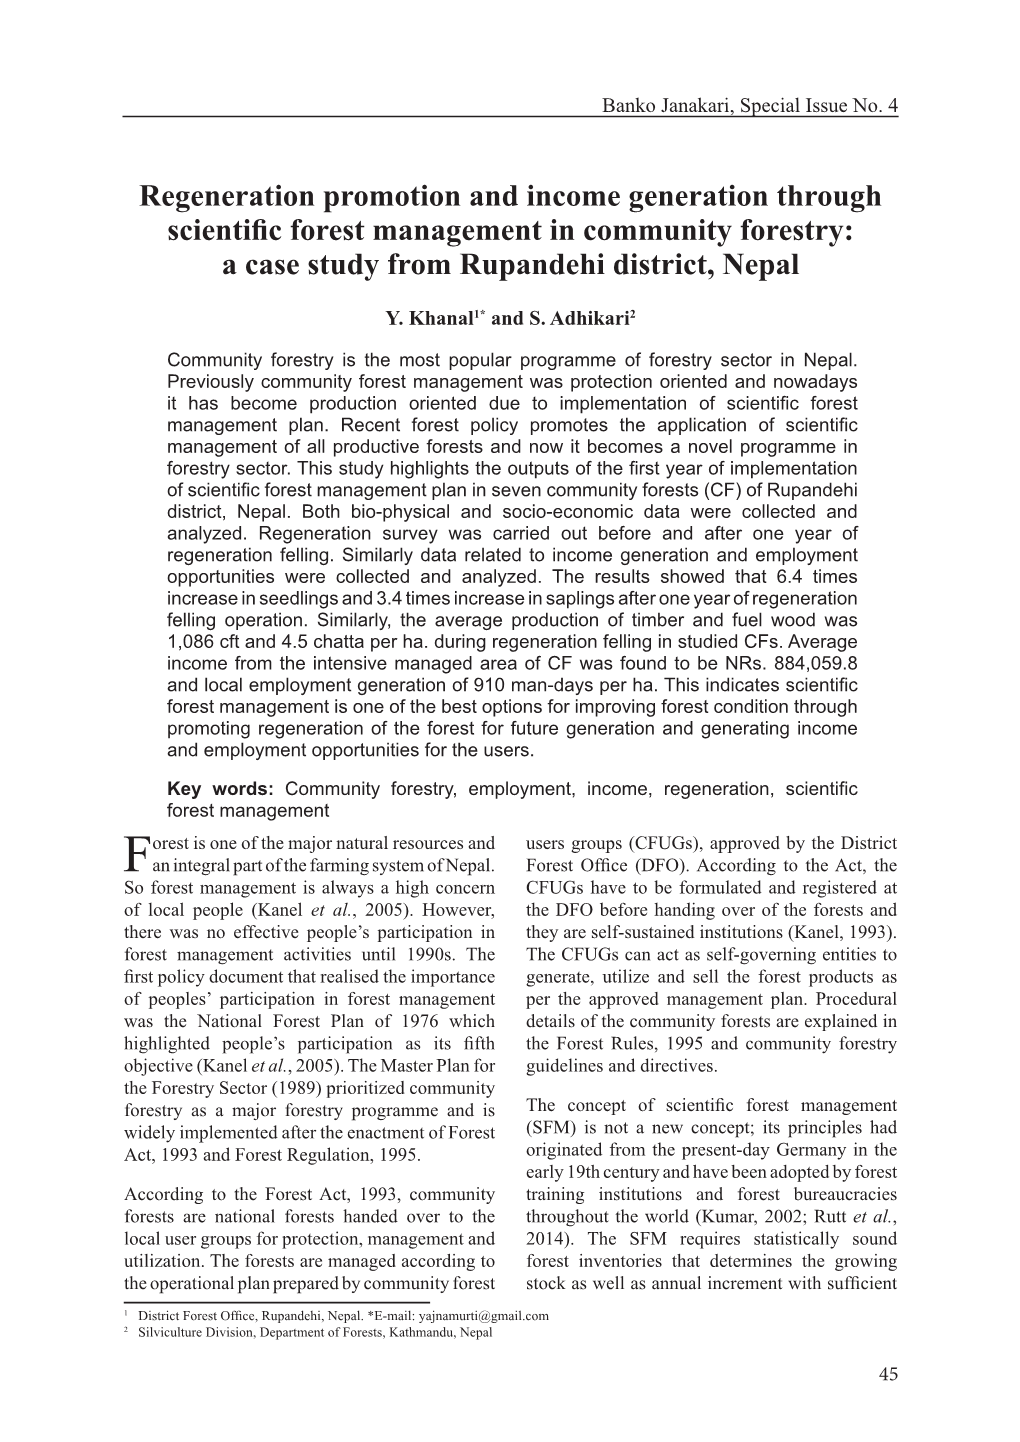 Regeneration Promotion and Income Generation Through Scientific Forest Management in Community Forestry: a Case Study from Rupandehi District, Nepal